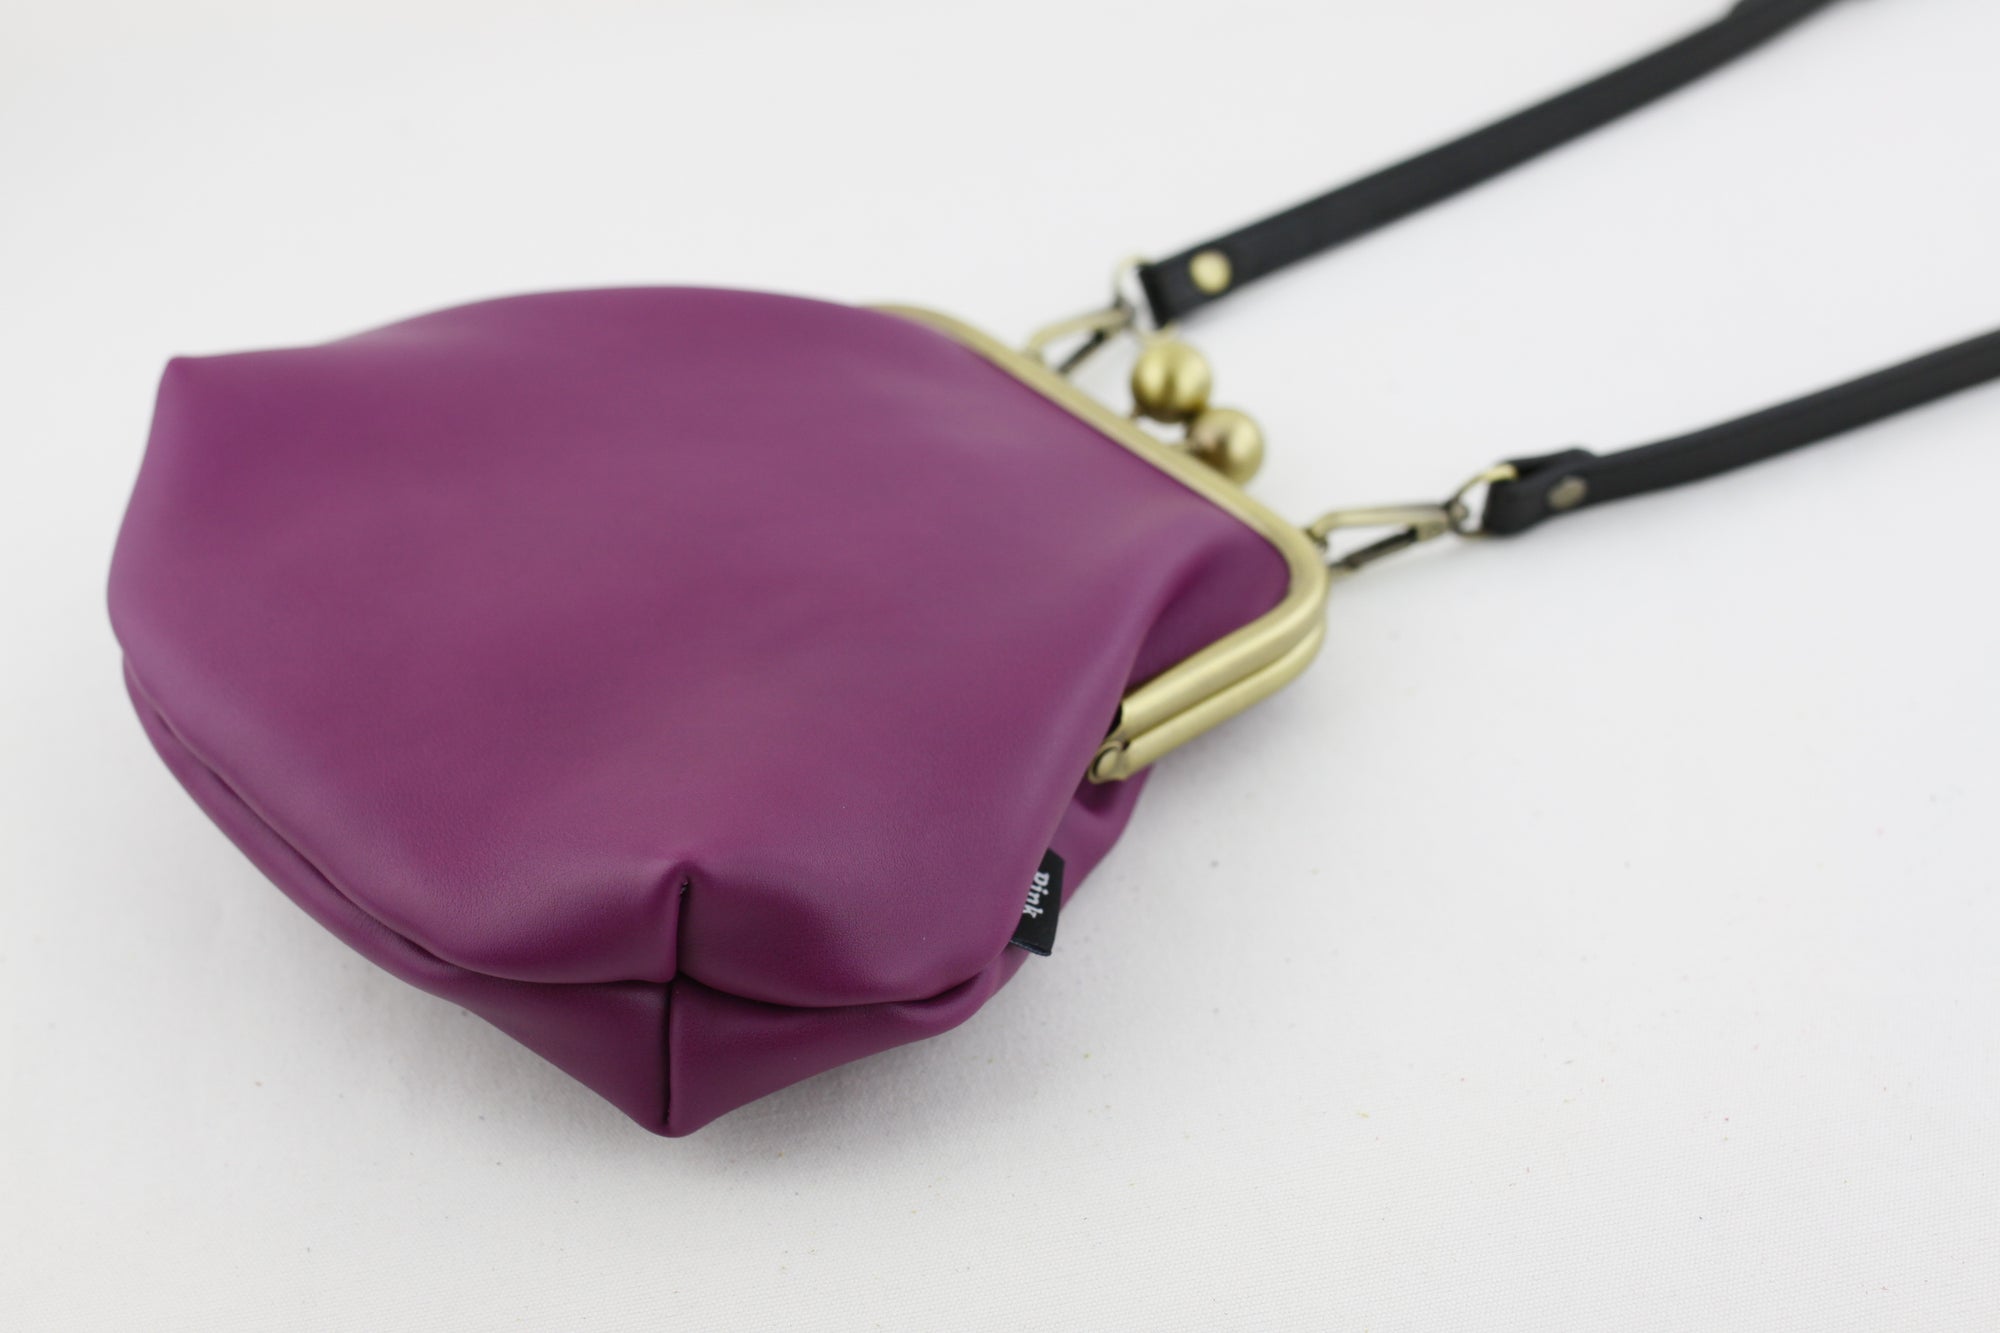 Women's Purple Genuine Leather Clutch Bag with Strap | PINKOASIS